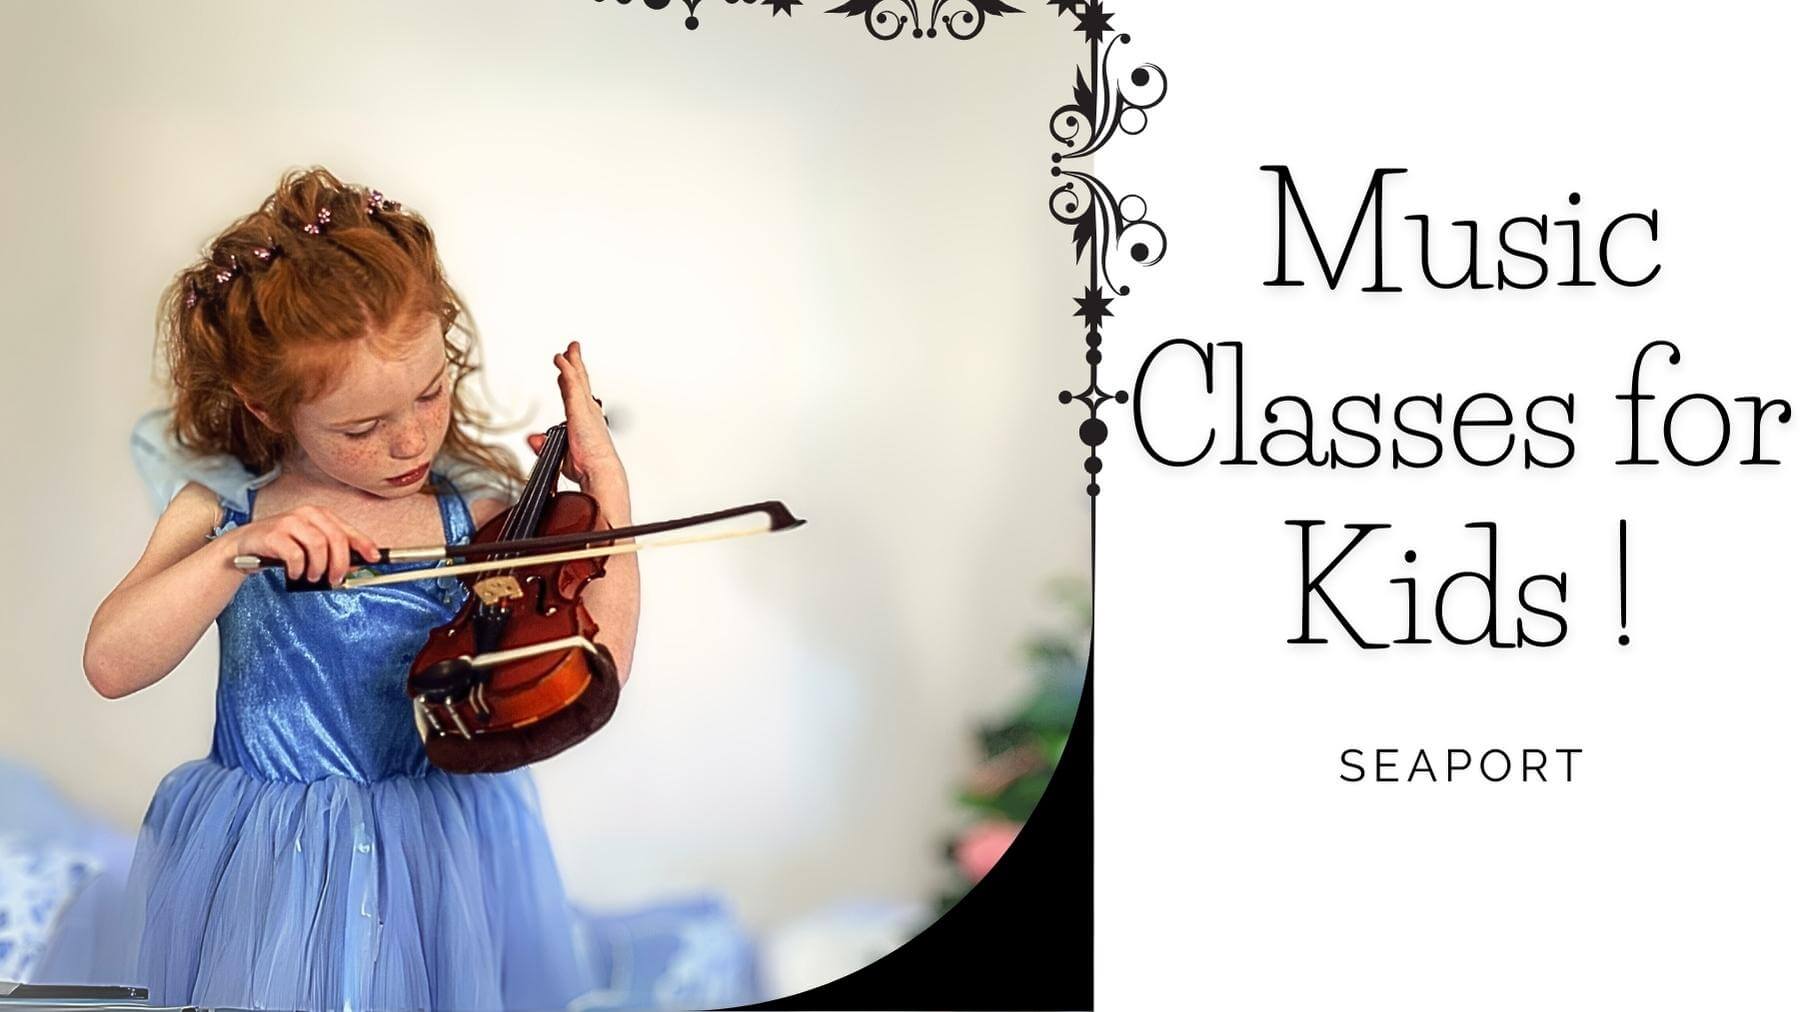 Welcome to Seaport: Music Classes for Kids at Musicians Playground